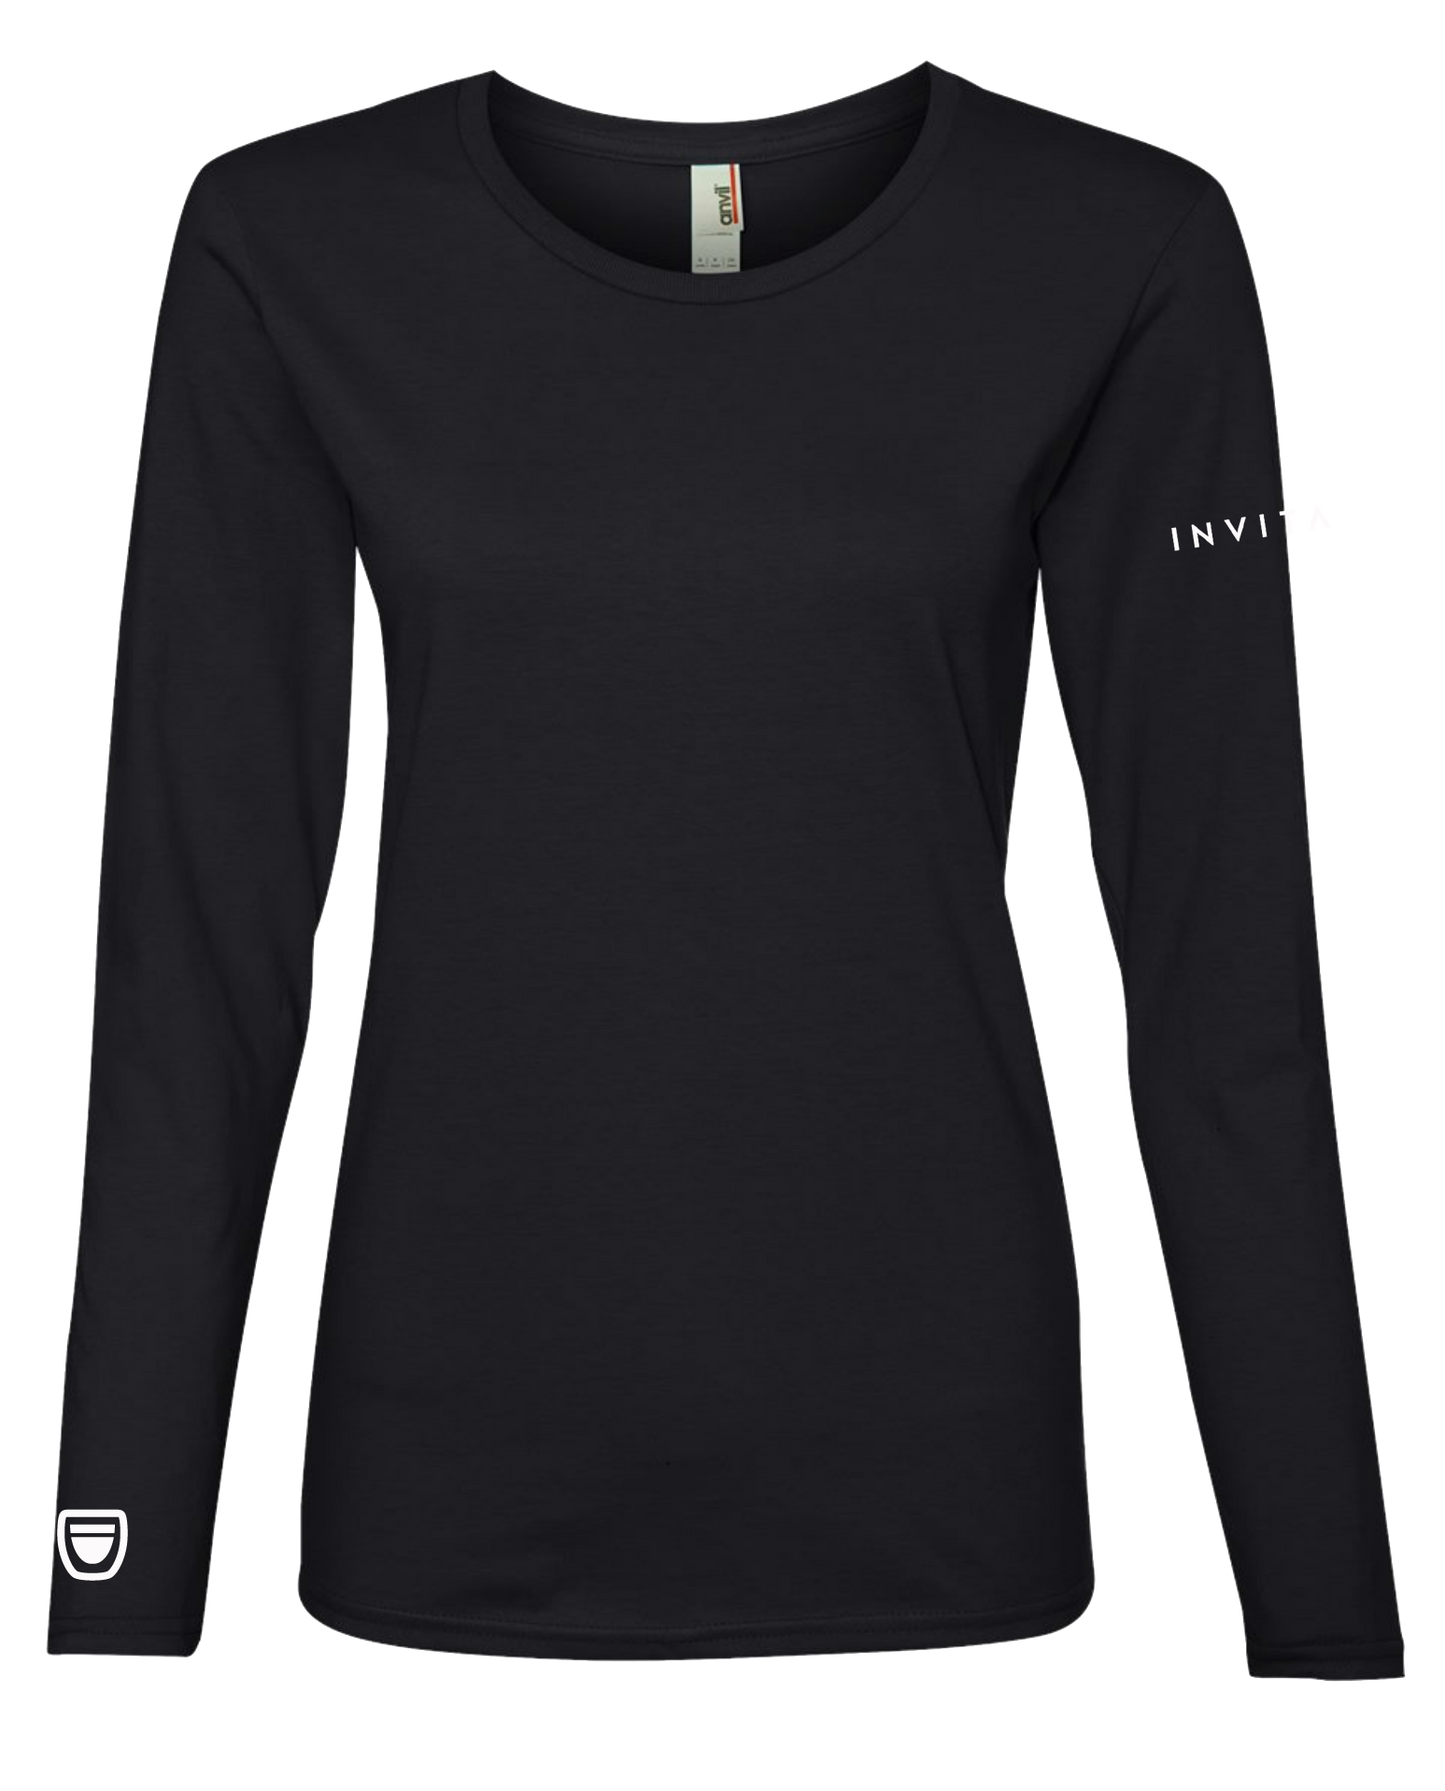 Invita - Cafe Longsleeve 2 location (Womens) *2 Colors Available